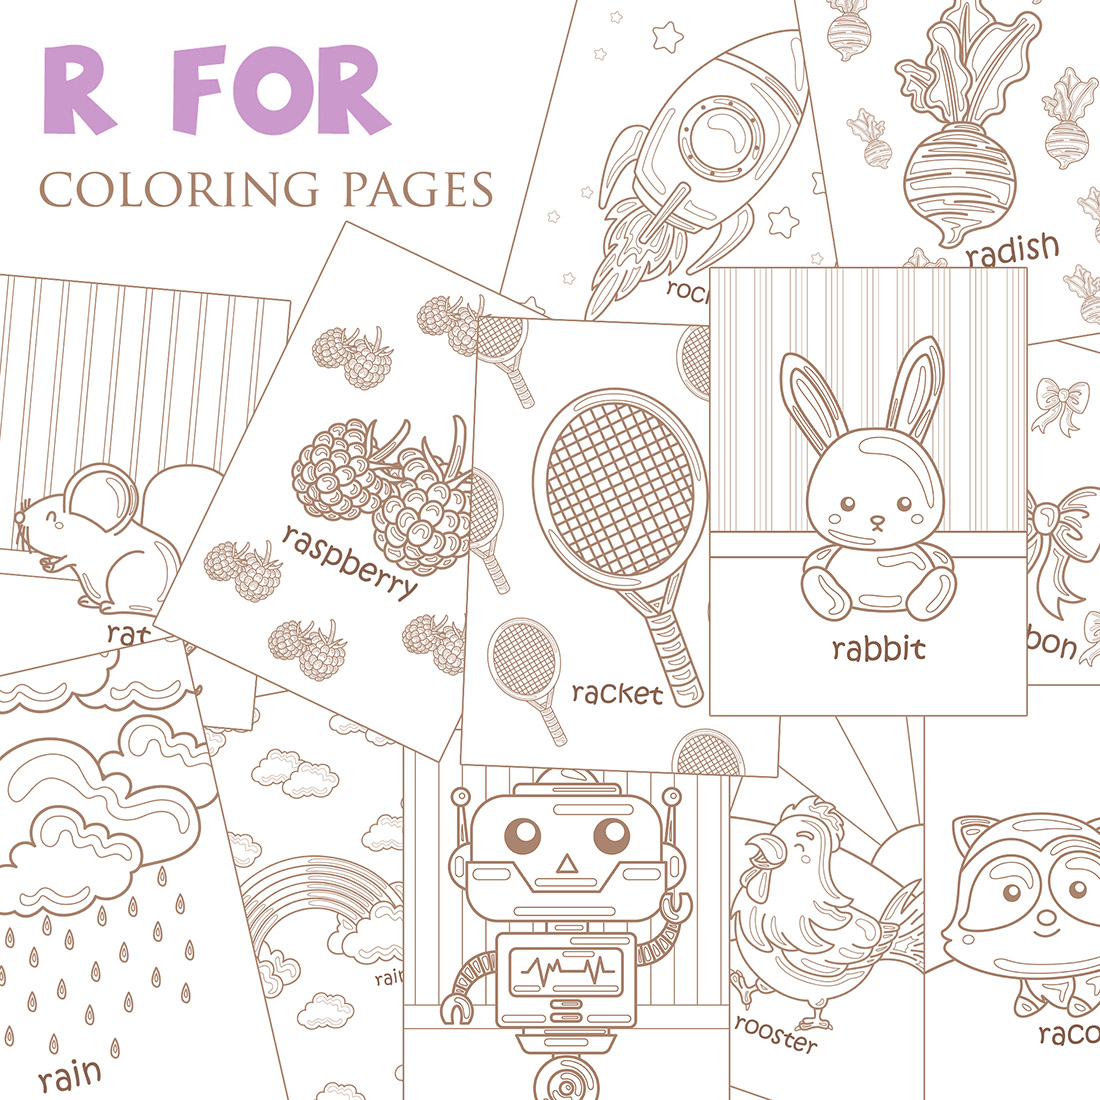 Alphabet R For Vocabulary School Lesson Rocket Robot Rat Rabbit Radish Ribbon Racoon Racket Rainbow Raspberry Rain Rooster Cartoon Coloring for Kids and Adult cover image.